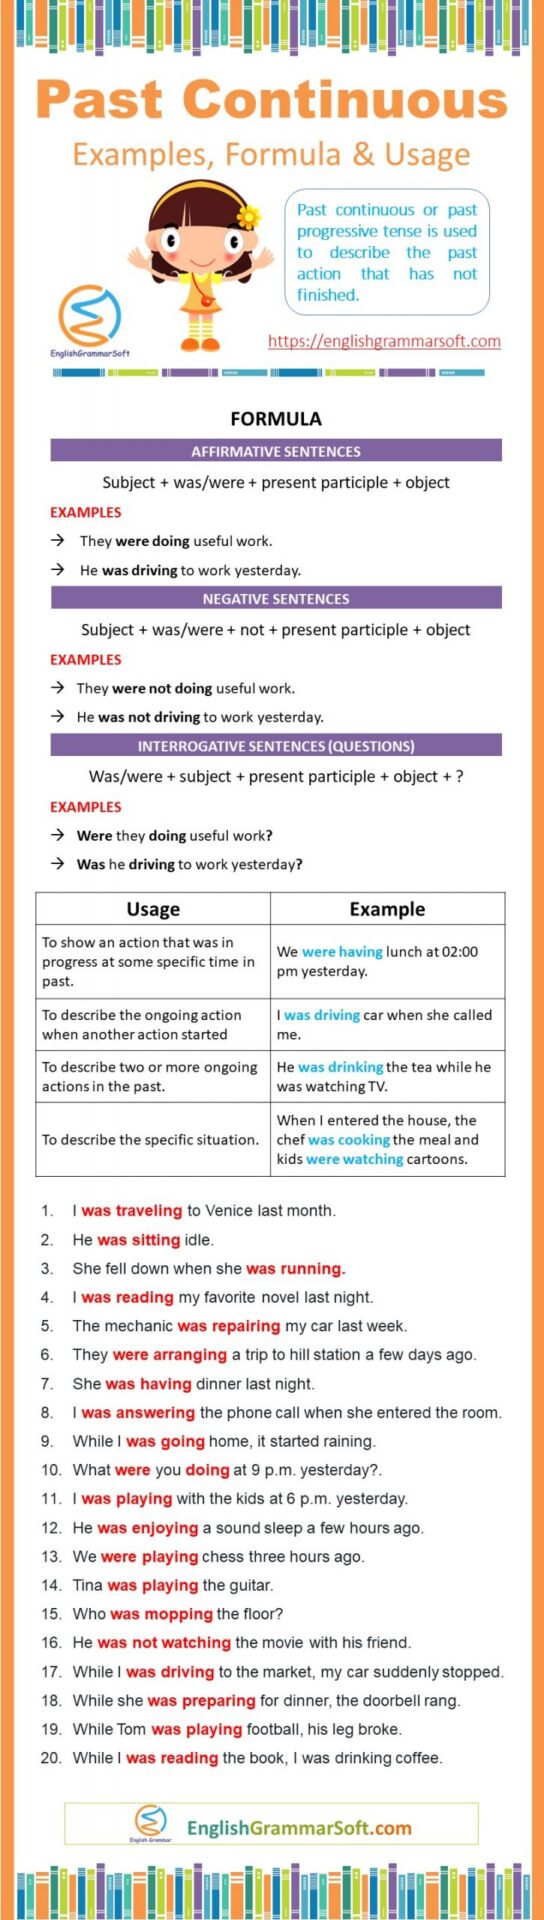 Past continuous tense examples